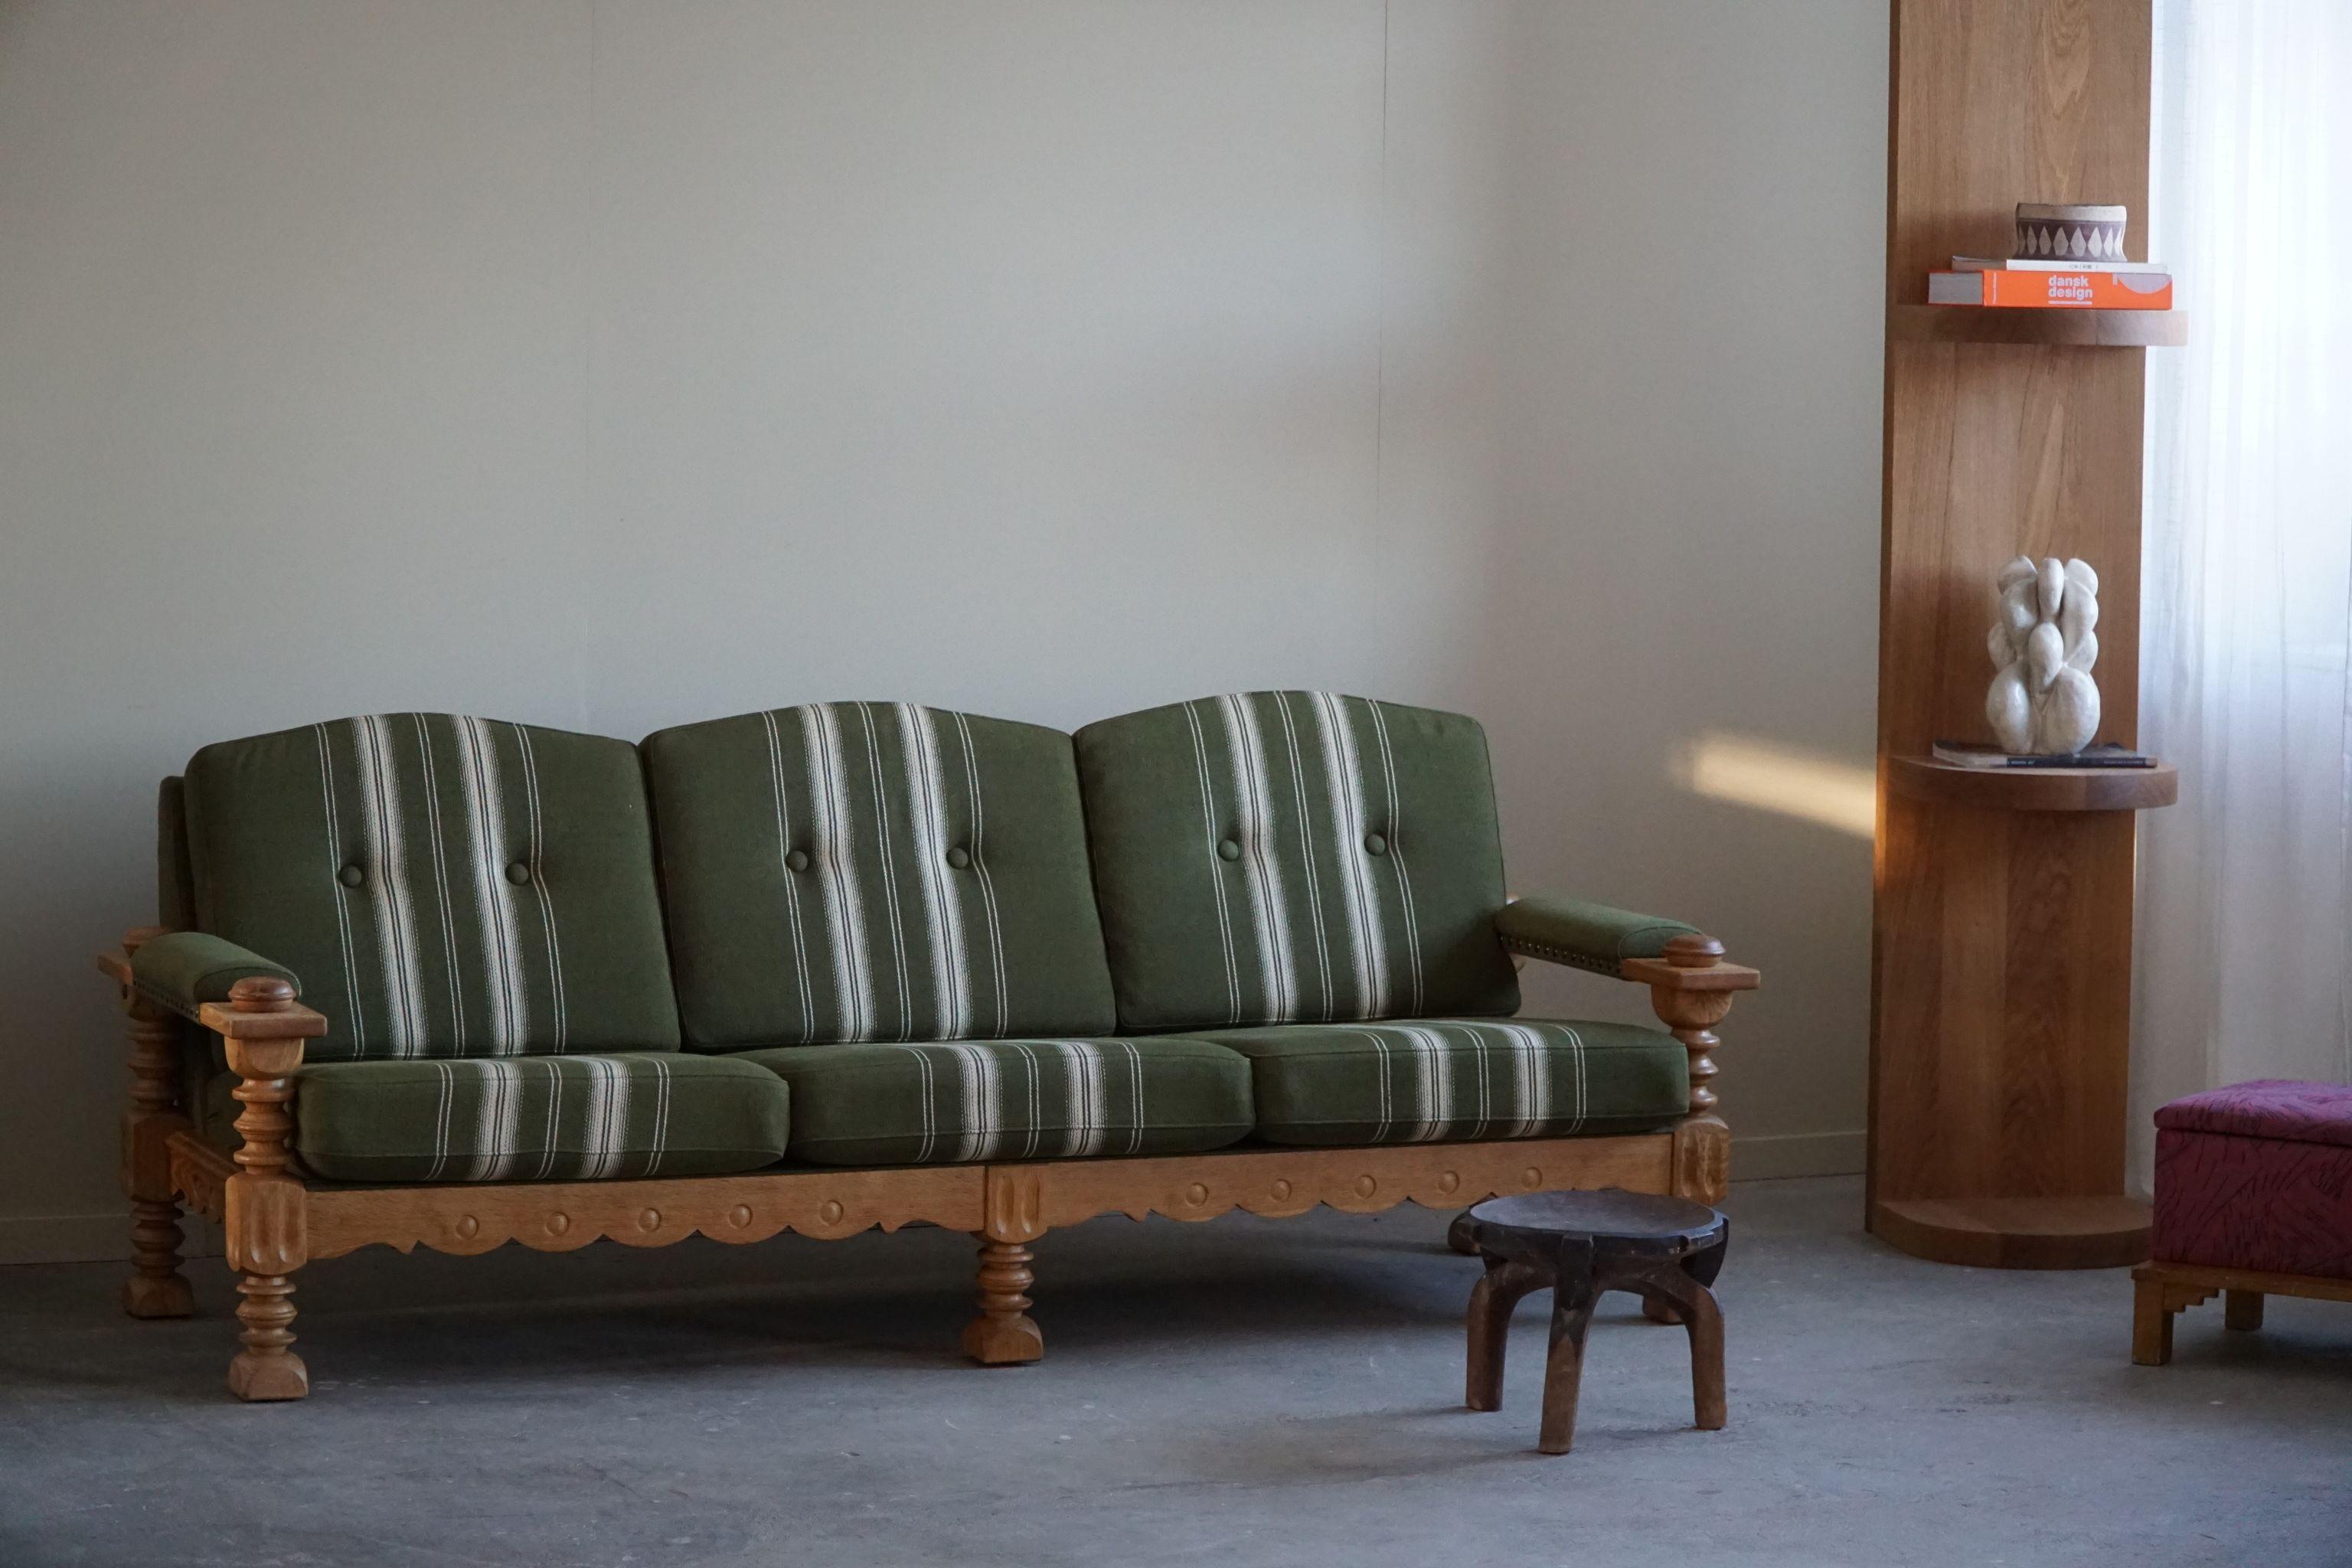 A fascinating sculptural Danish sofa in the manner of Henning (Henry) Kjærnulf. Made in solid oak and its original Savak wool cushions. Made in 1960s by a Danish Cabinetmaker with a great sense for details. The general impression is really